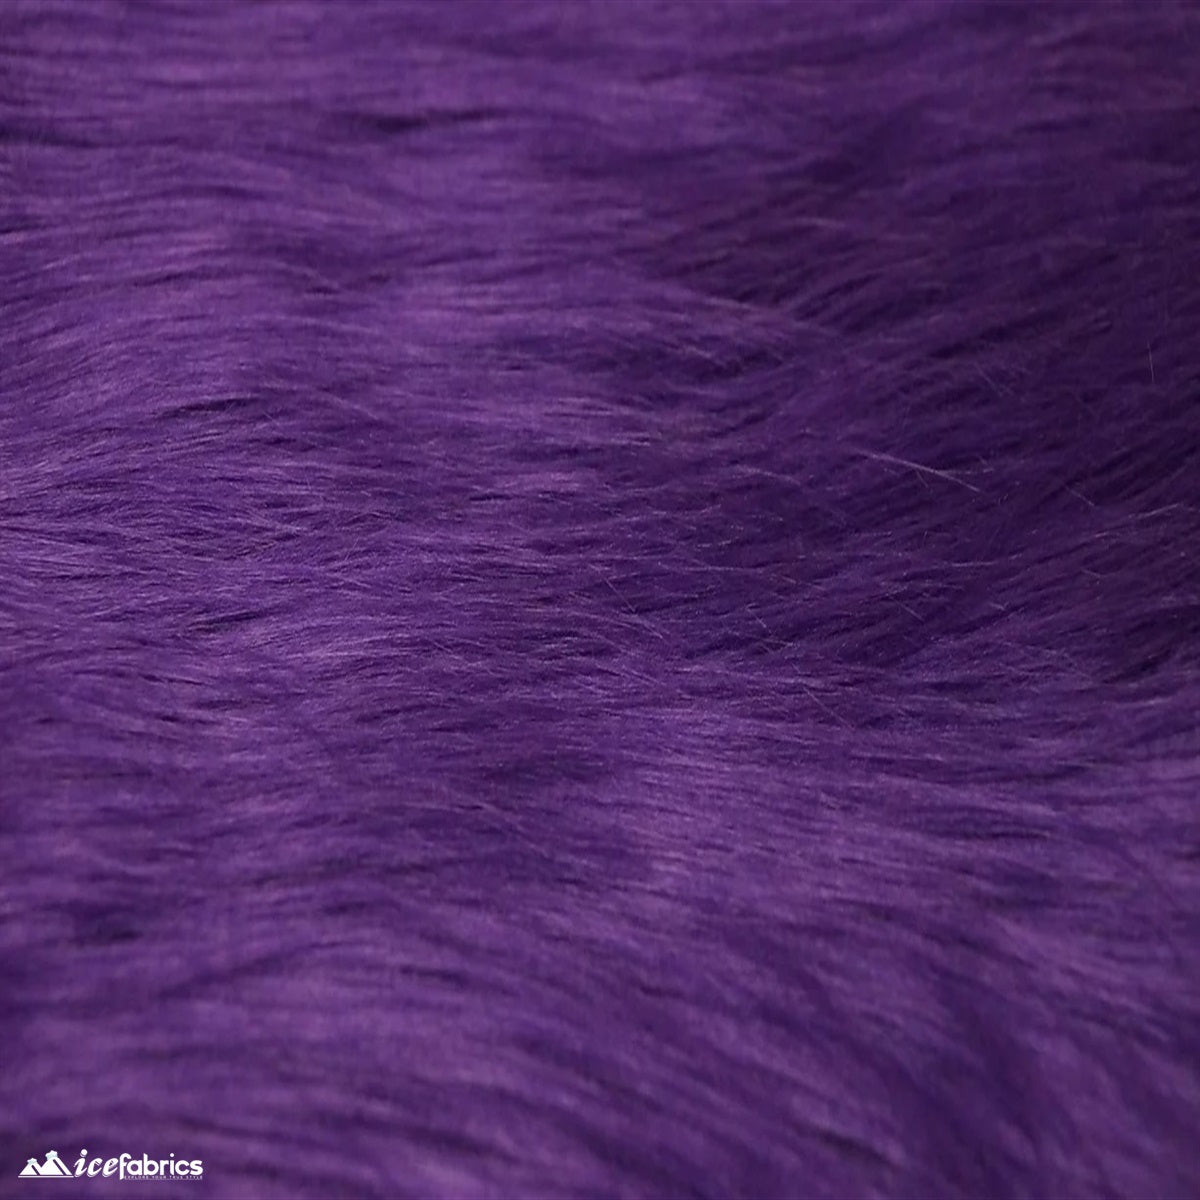 Mohair Faux Fur Fabric By The Roll (20 Yards) 4 Inch Pile